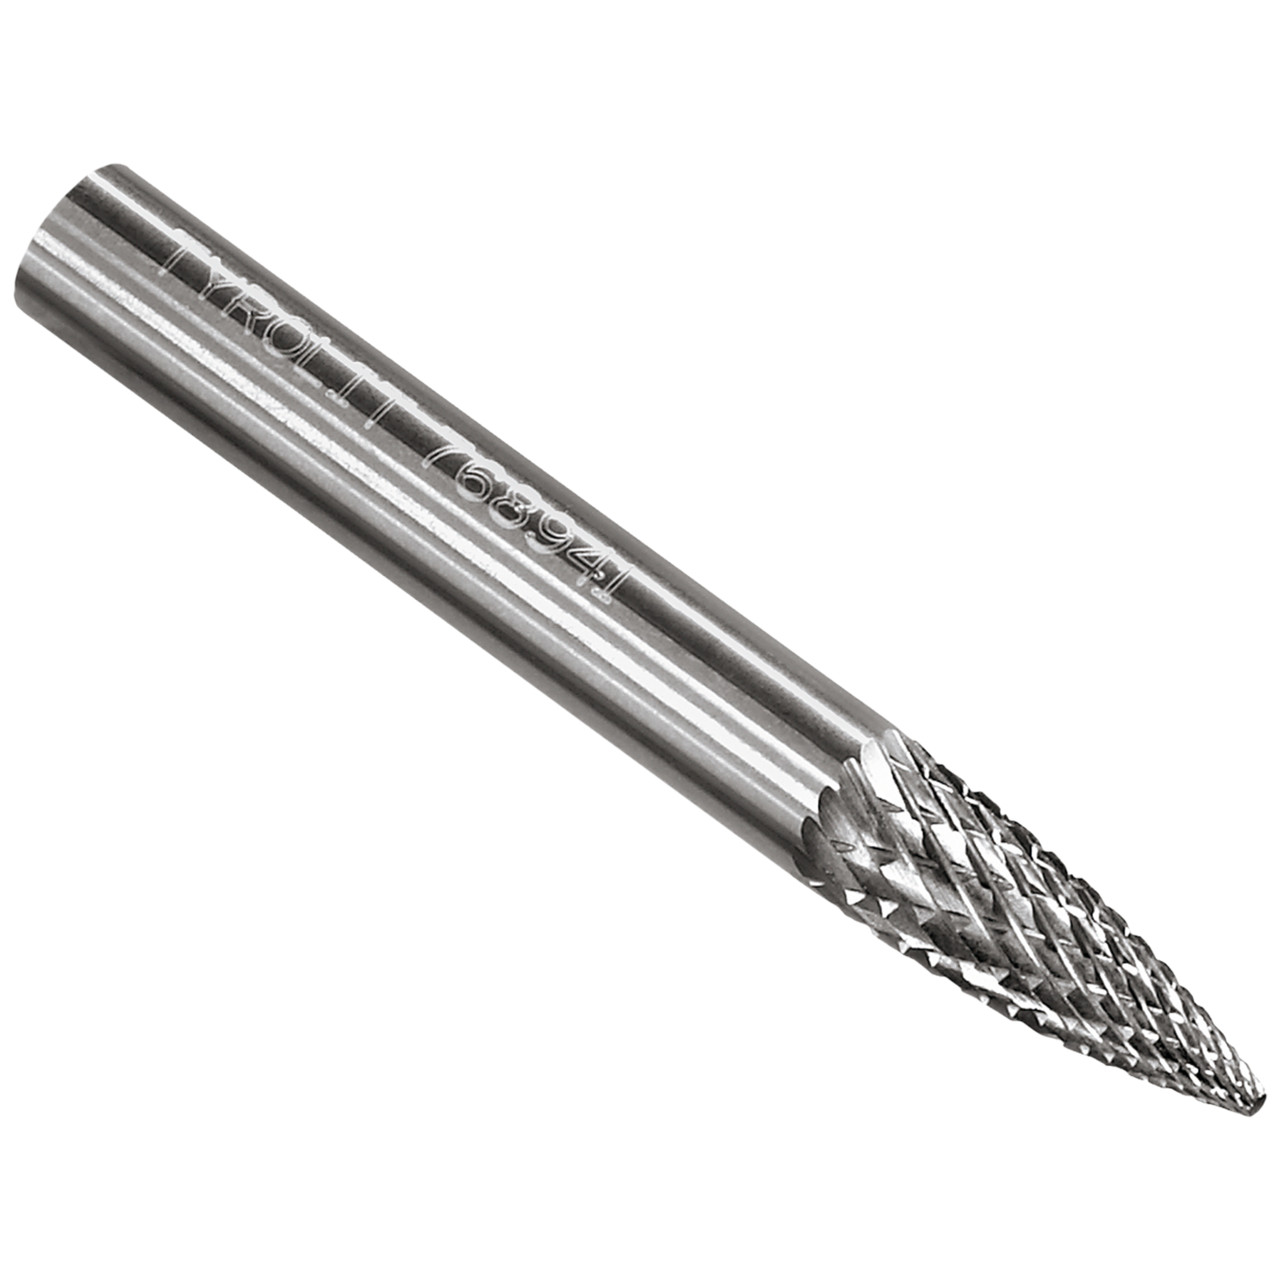 TYROLIT carbide end mill DxT-SxL 12x25-6x70 For cast iron, steel and stainless steel, shape: 52SPG - projectile, Art. 768948